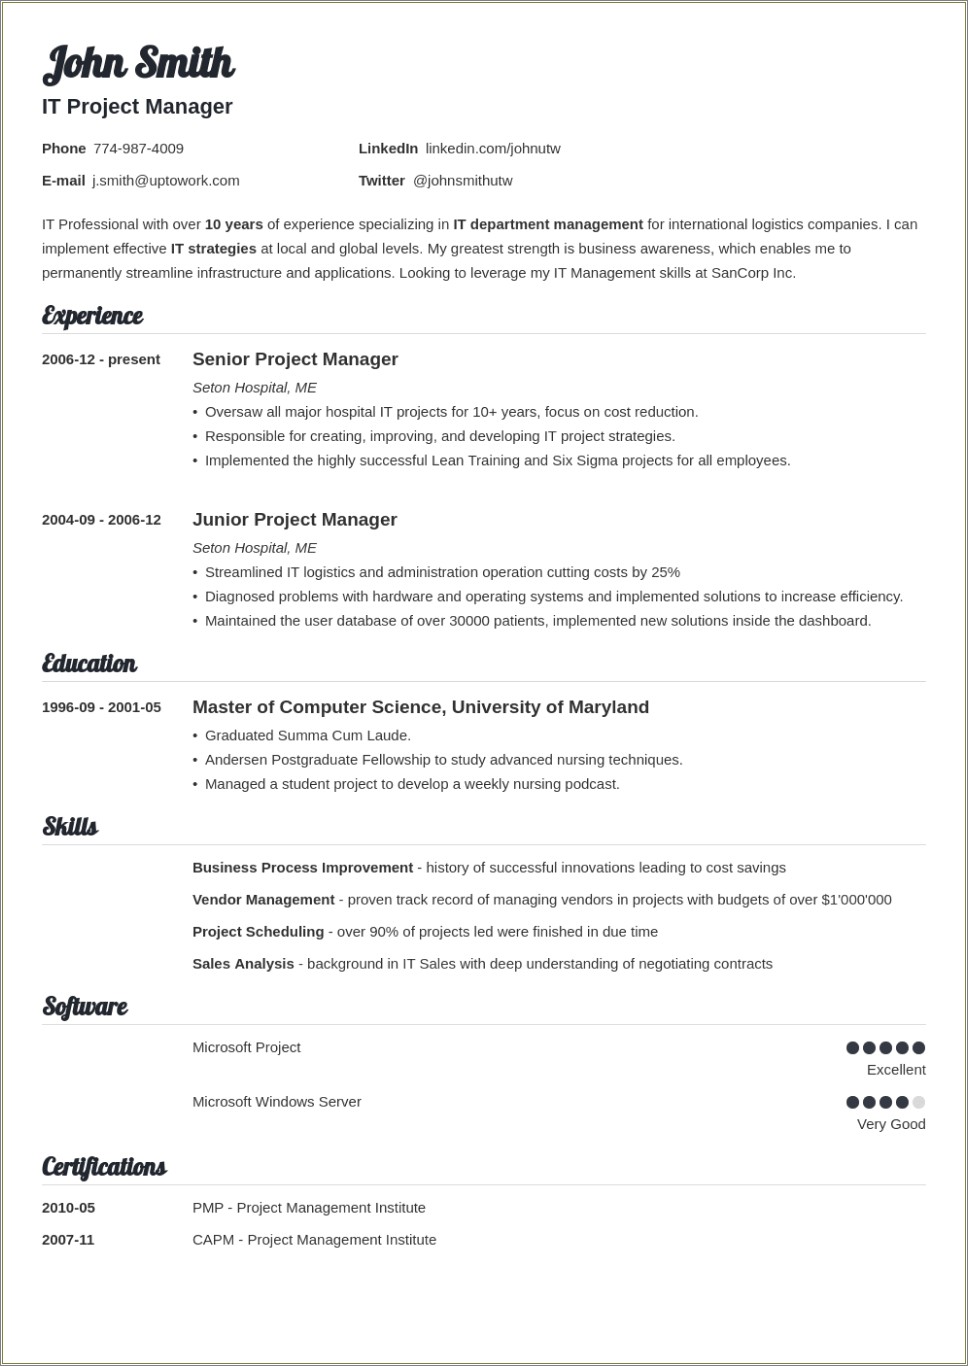 resume format for it jobs